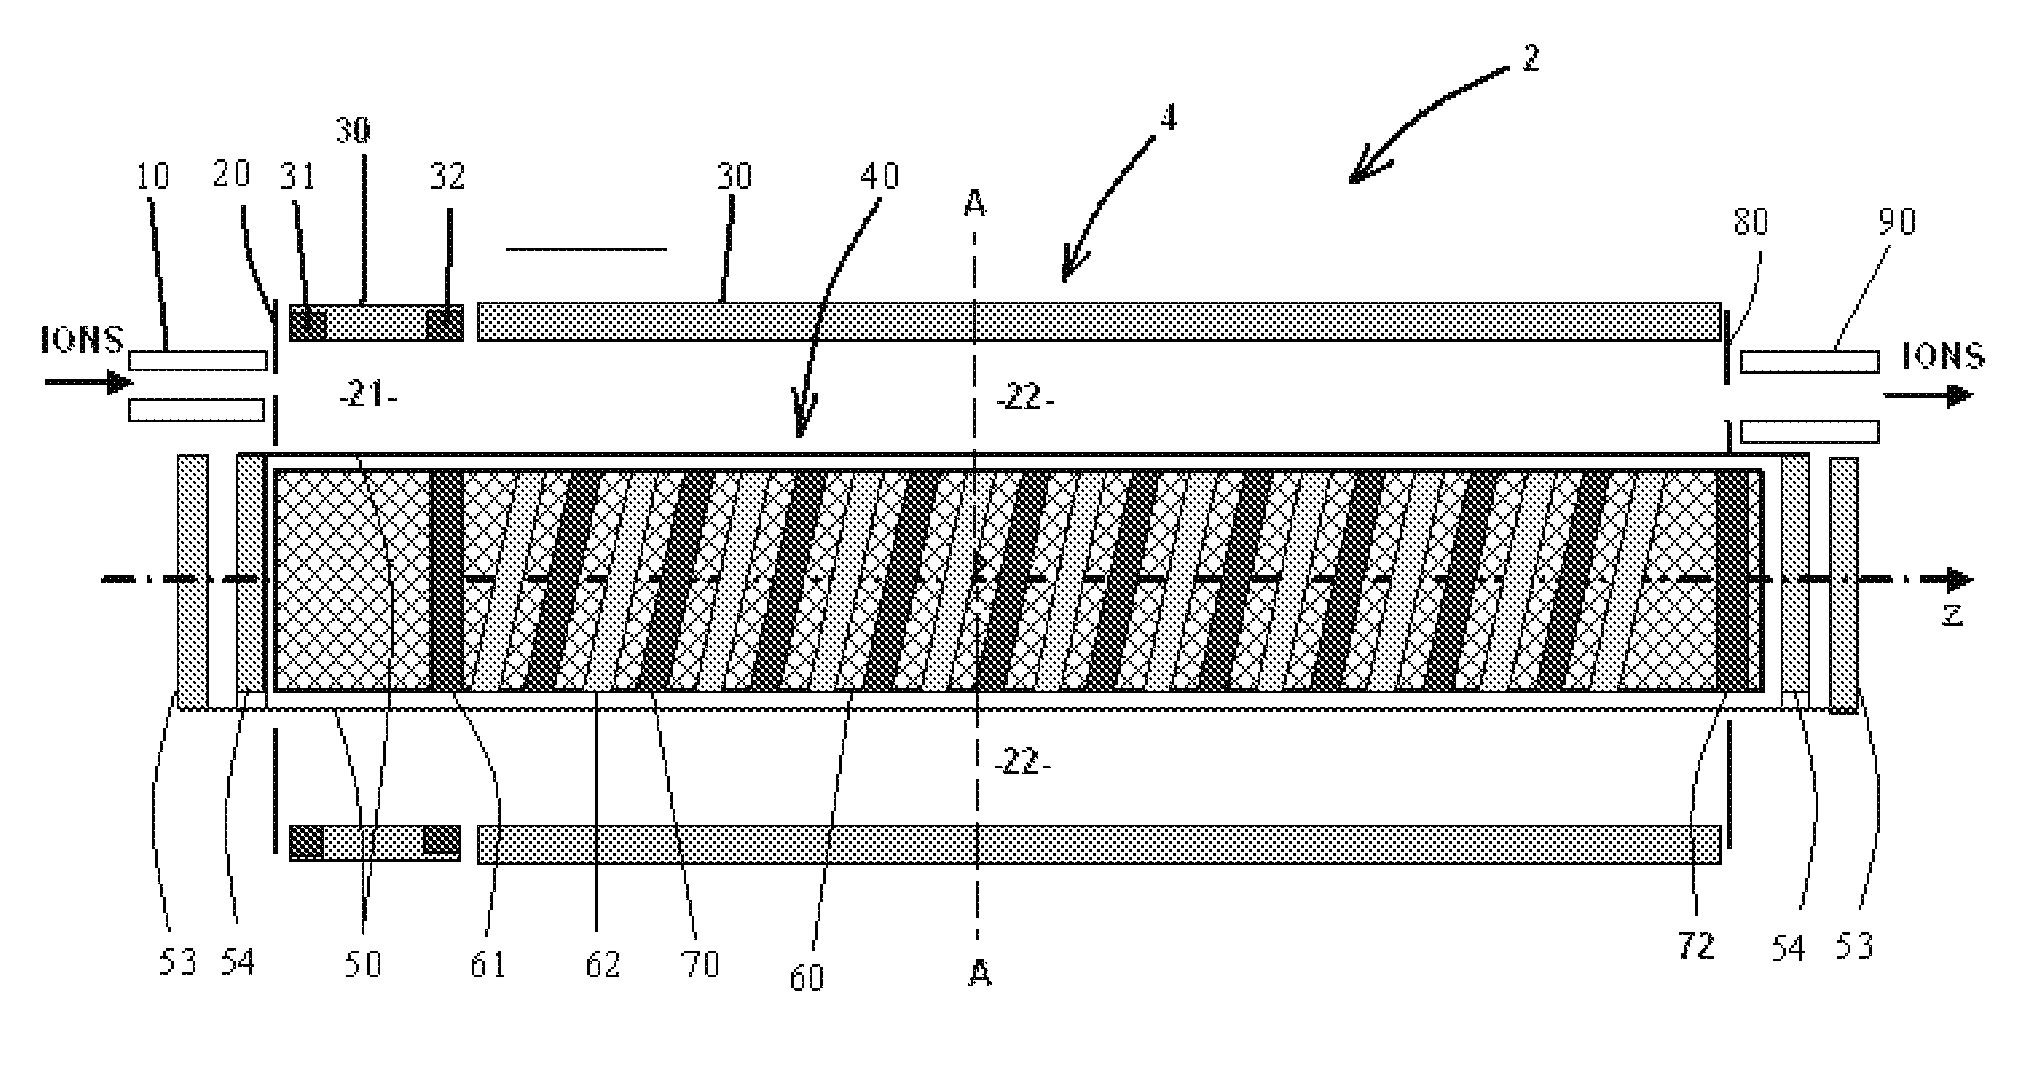 Apparatus and methods for ion mobility spectrometry